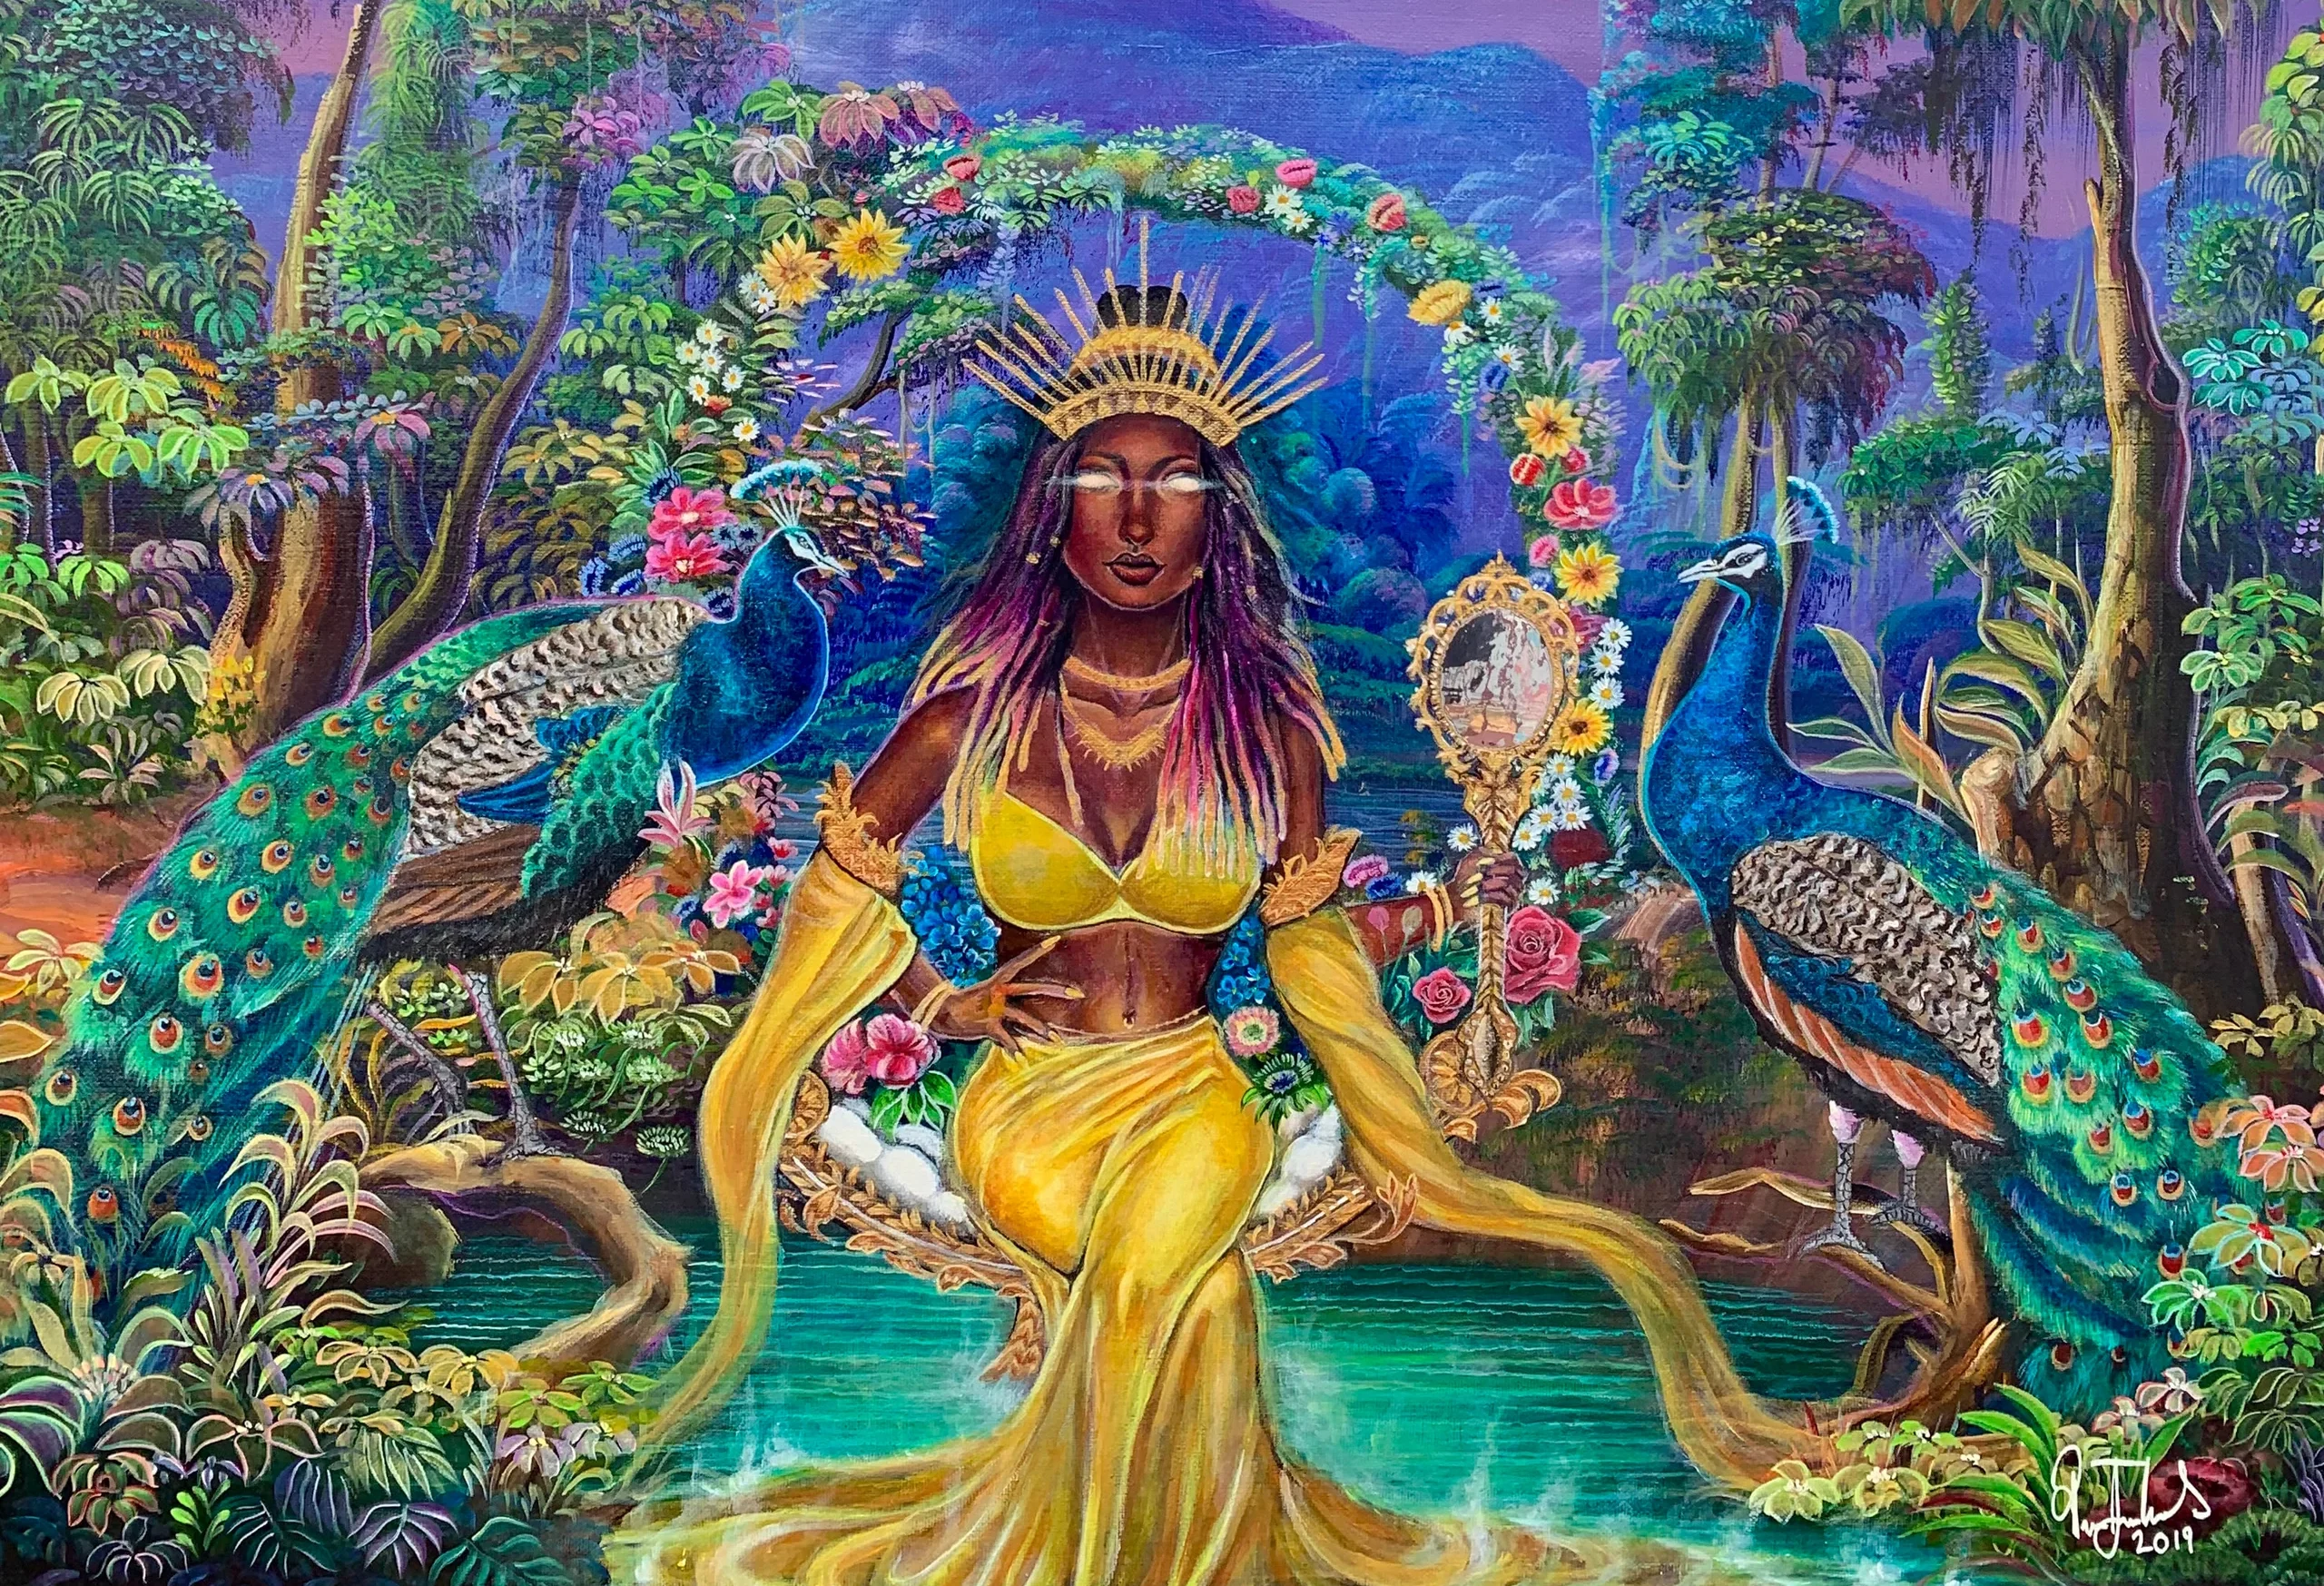 Oshun with Peacocks and Signature Colors